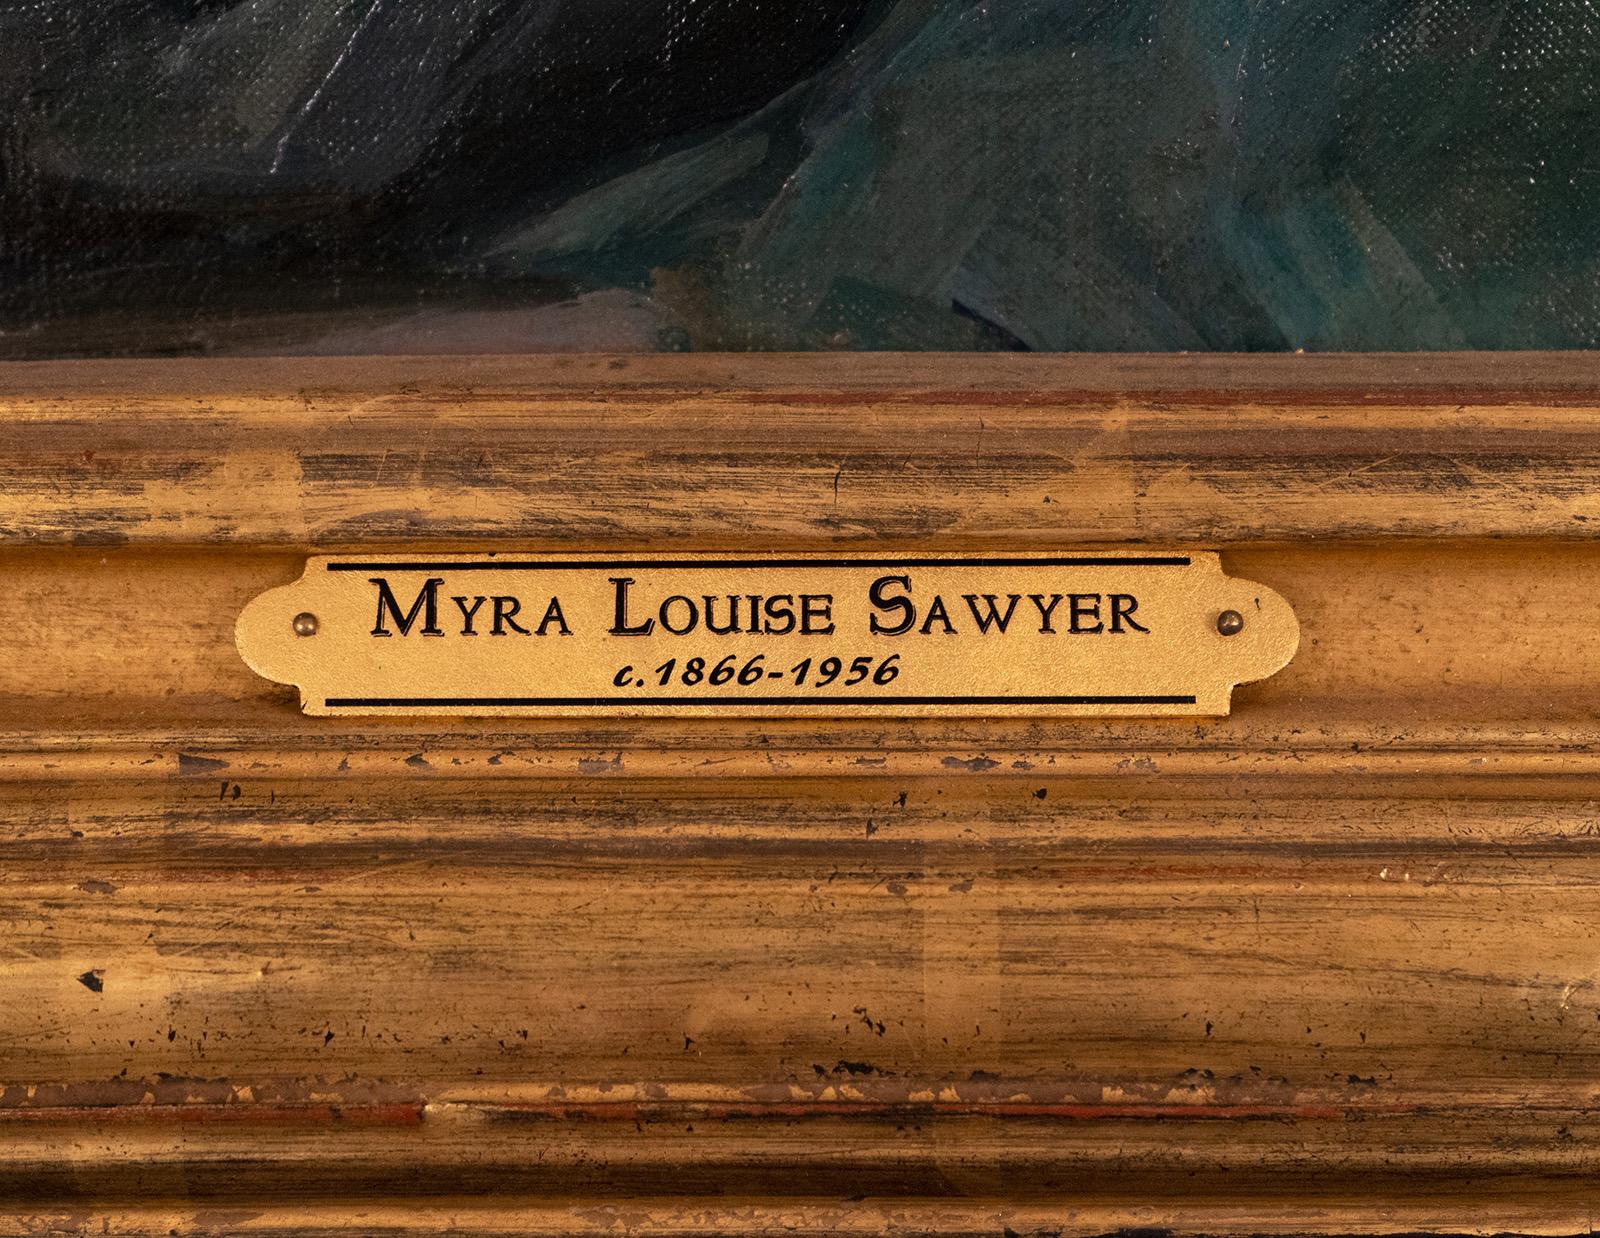 Myra Louise Sawyer (UTAH, 1866-1956) was one of the first female artists from Utah to receive name recognition for her work.

In the early 1900s, Sawyer studied art in Paris, France, with other Utah artists who were referred to as the 